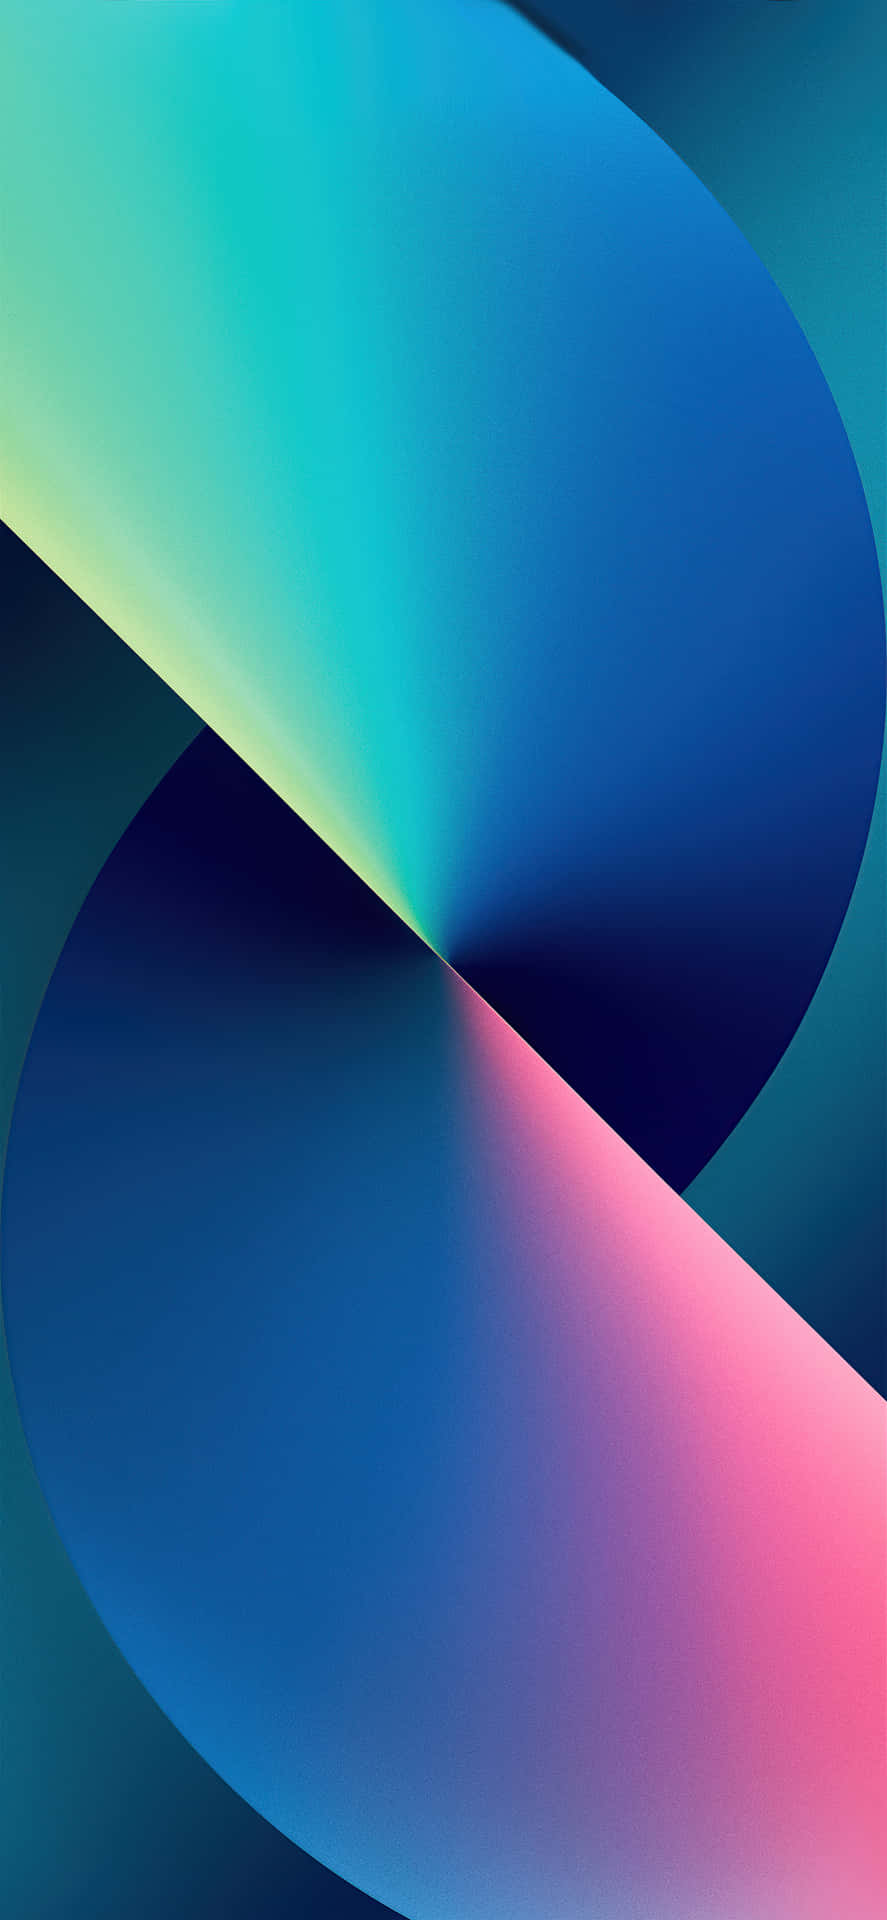 Free Abstract Iphone Wallpaper Downloads, [300+] Abstract Iphone Wallpapers  for FREE 